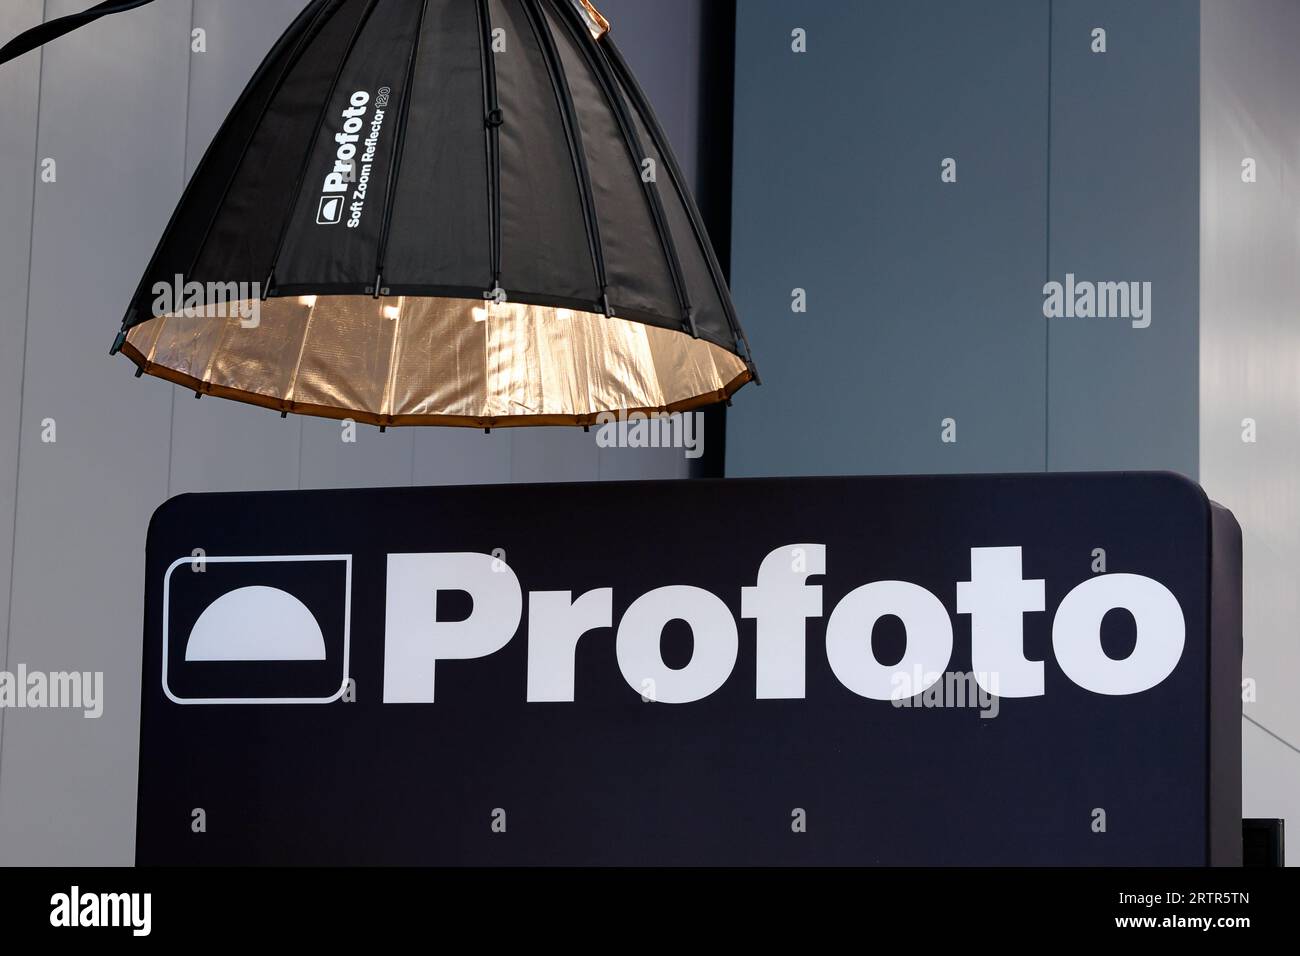 Signage for Prophoto photographic studio lighting equipment at a trade show, exhibition. Stock Photo